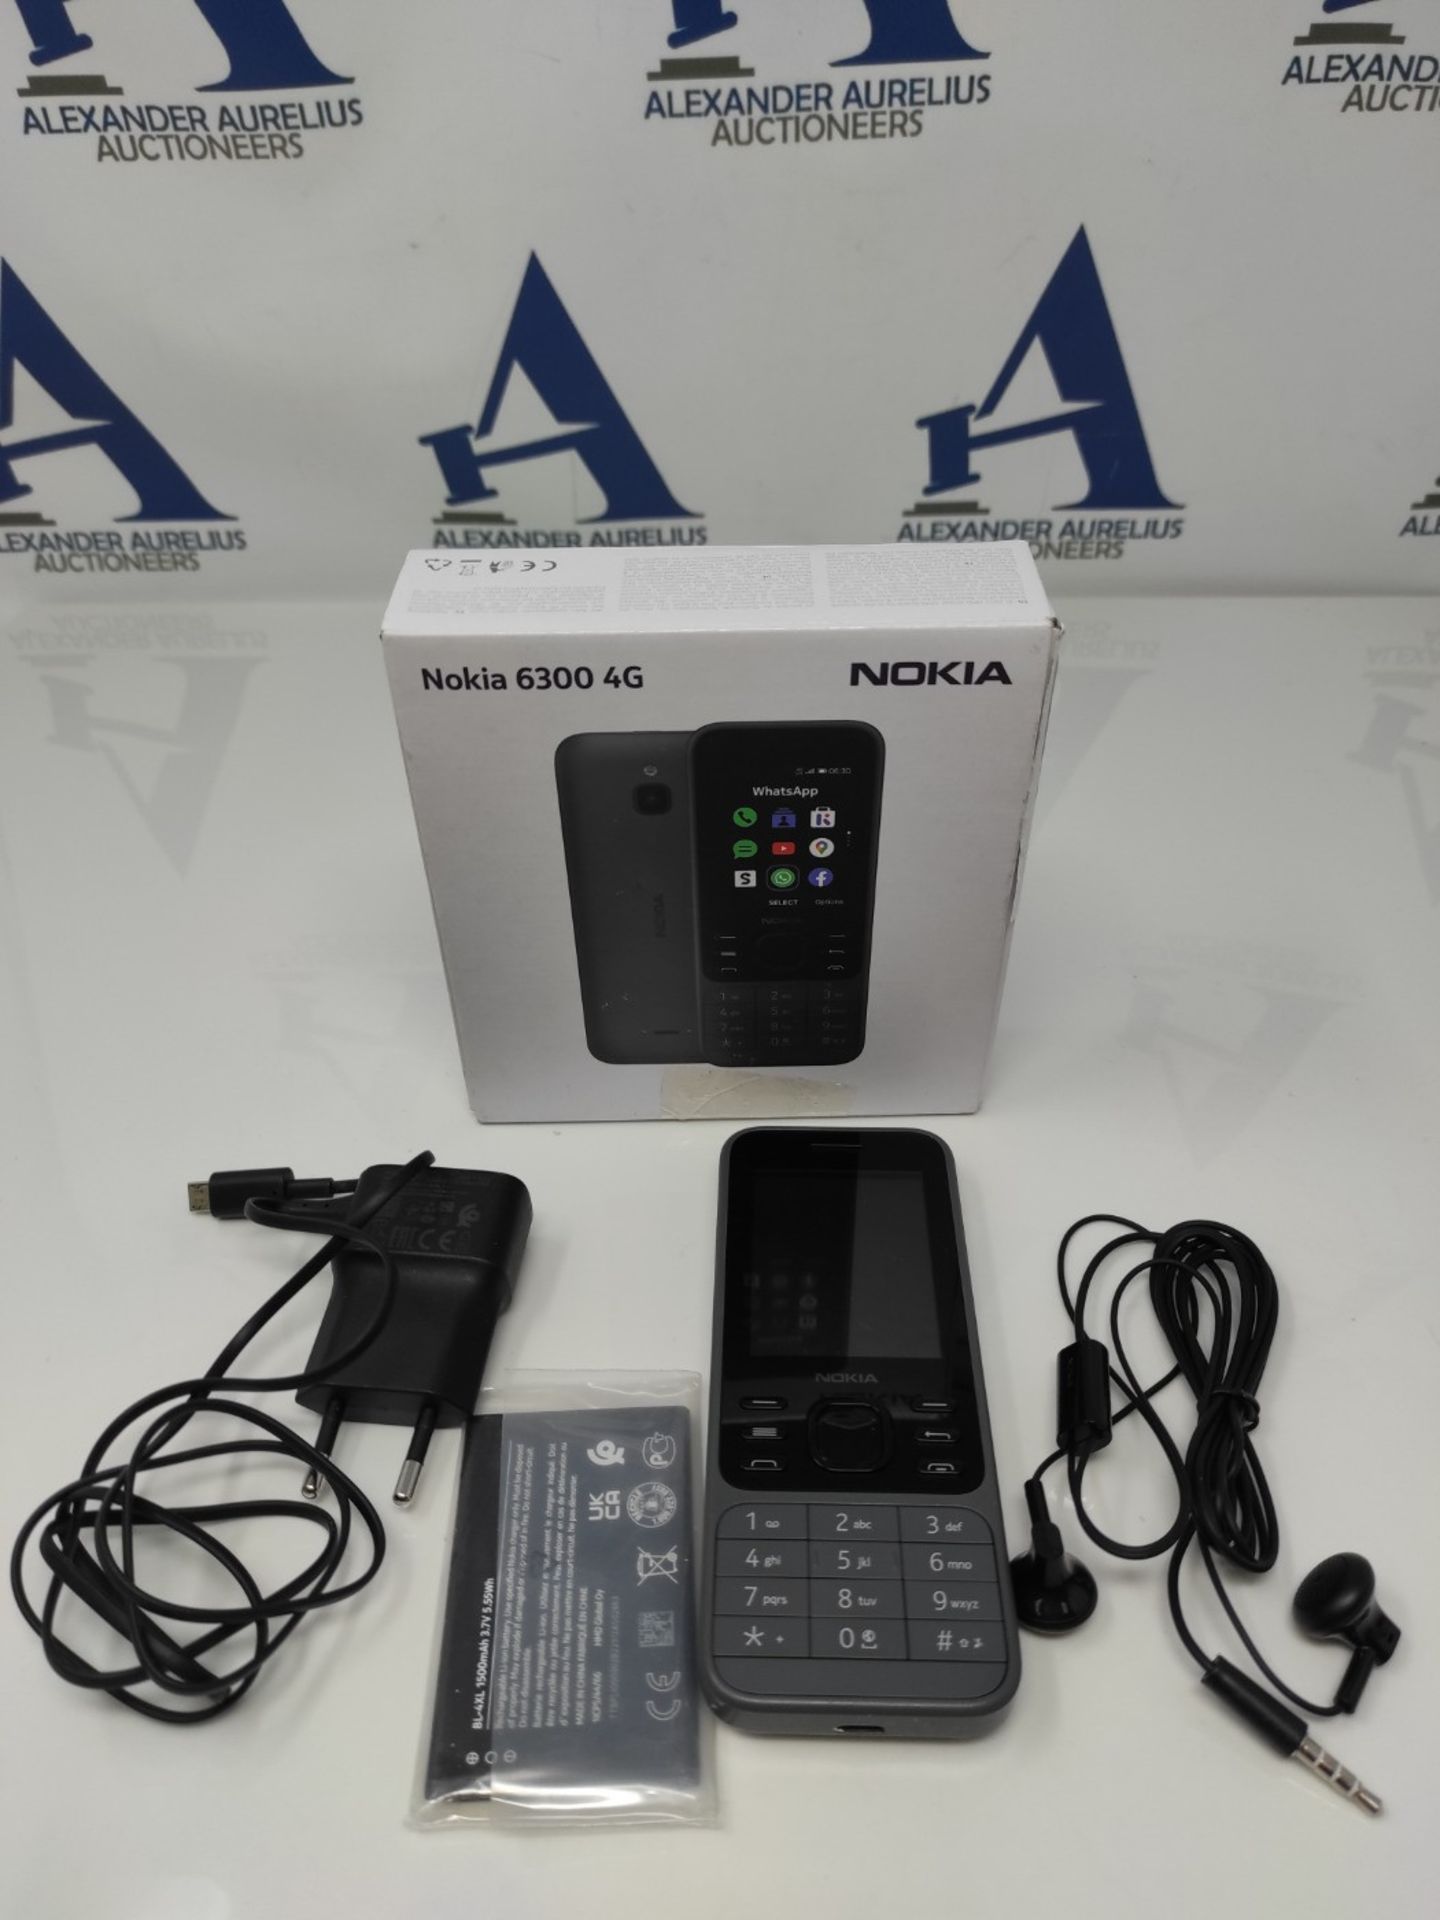 RRP £72.00 Nokia 6300 4G - Mobile Phone, Charcoal - Image 2 of 2